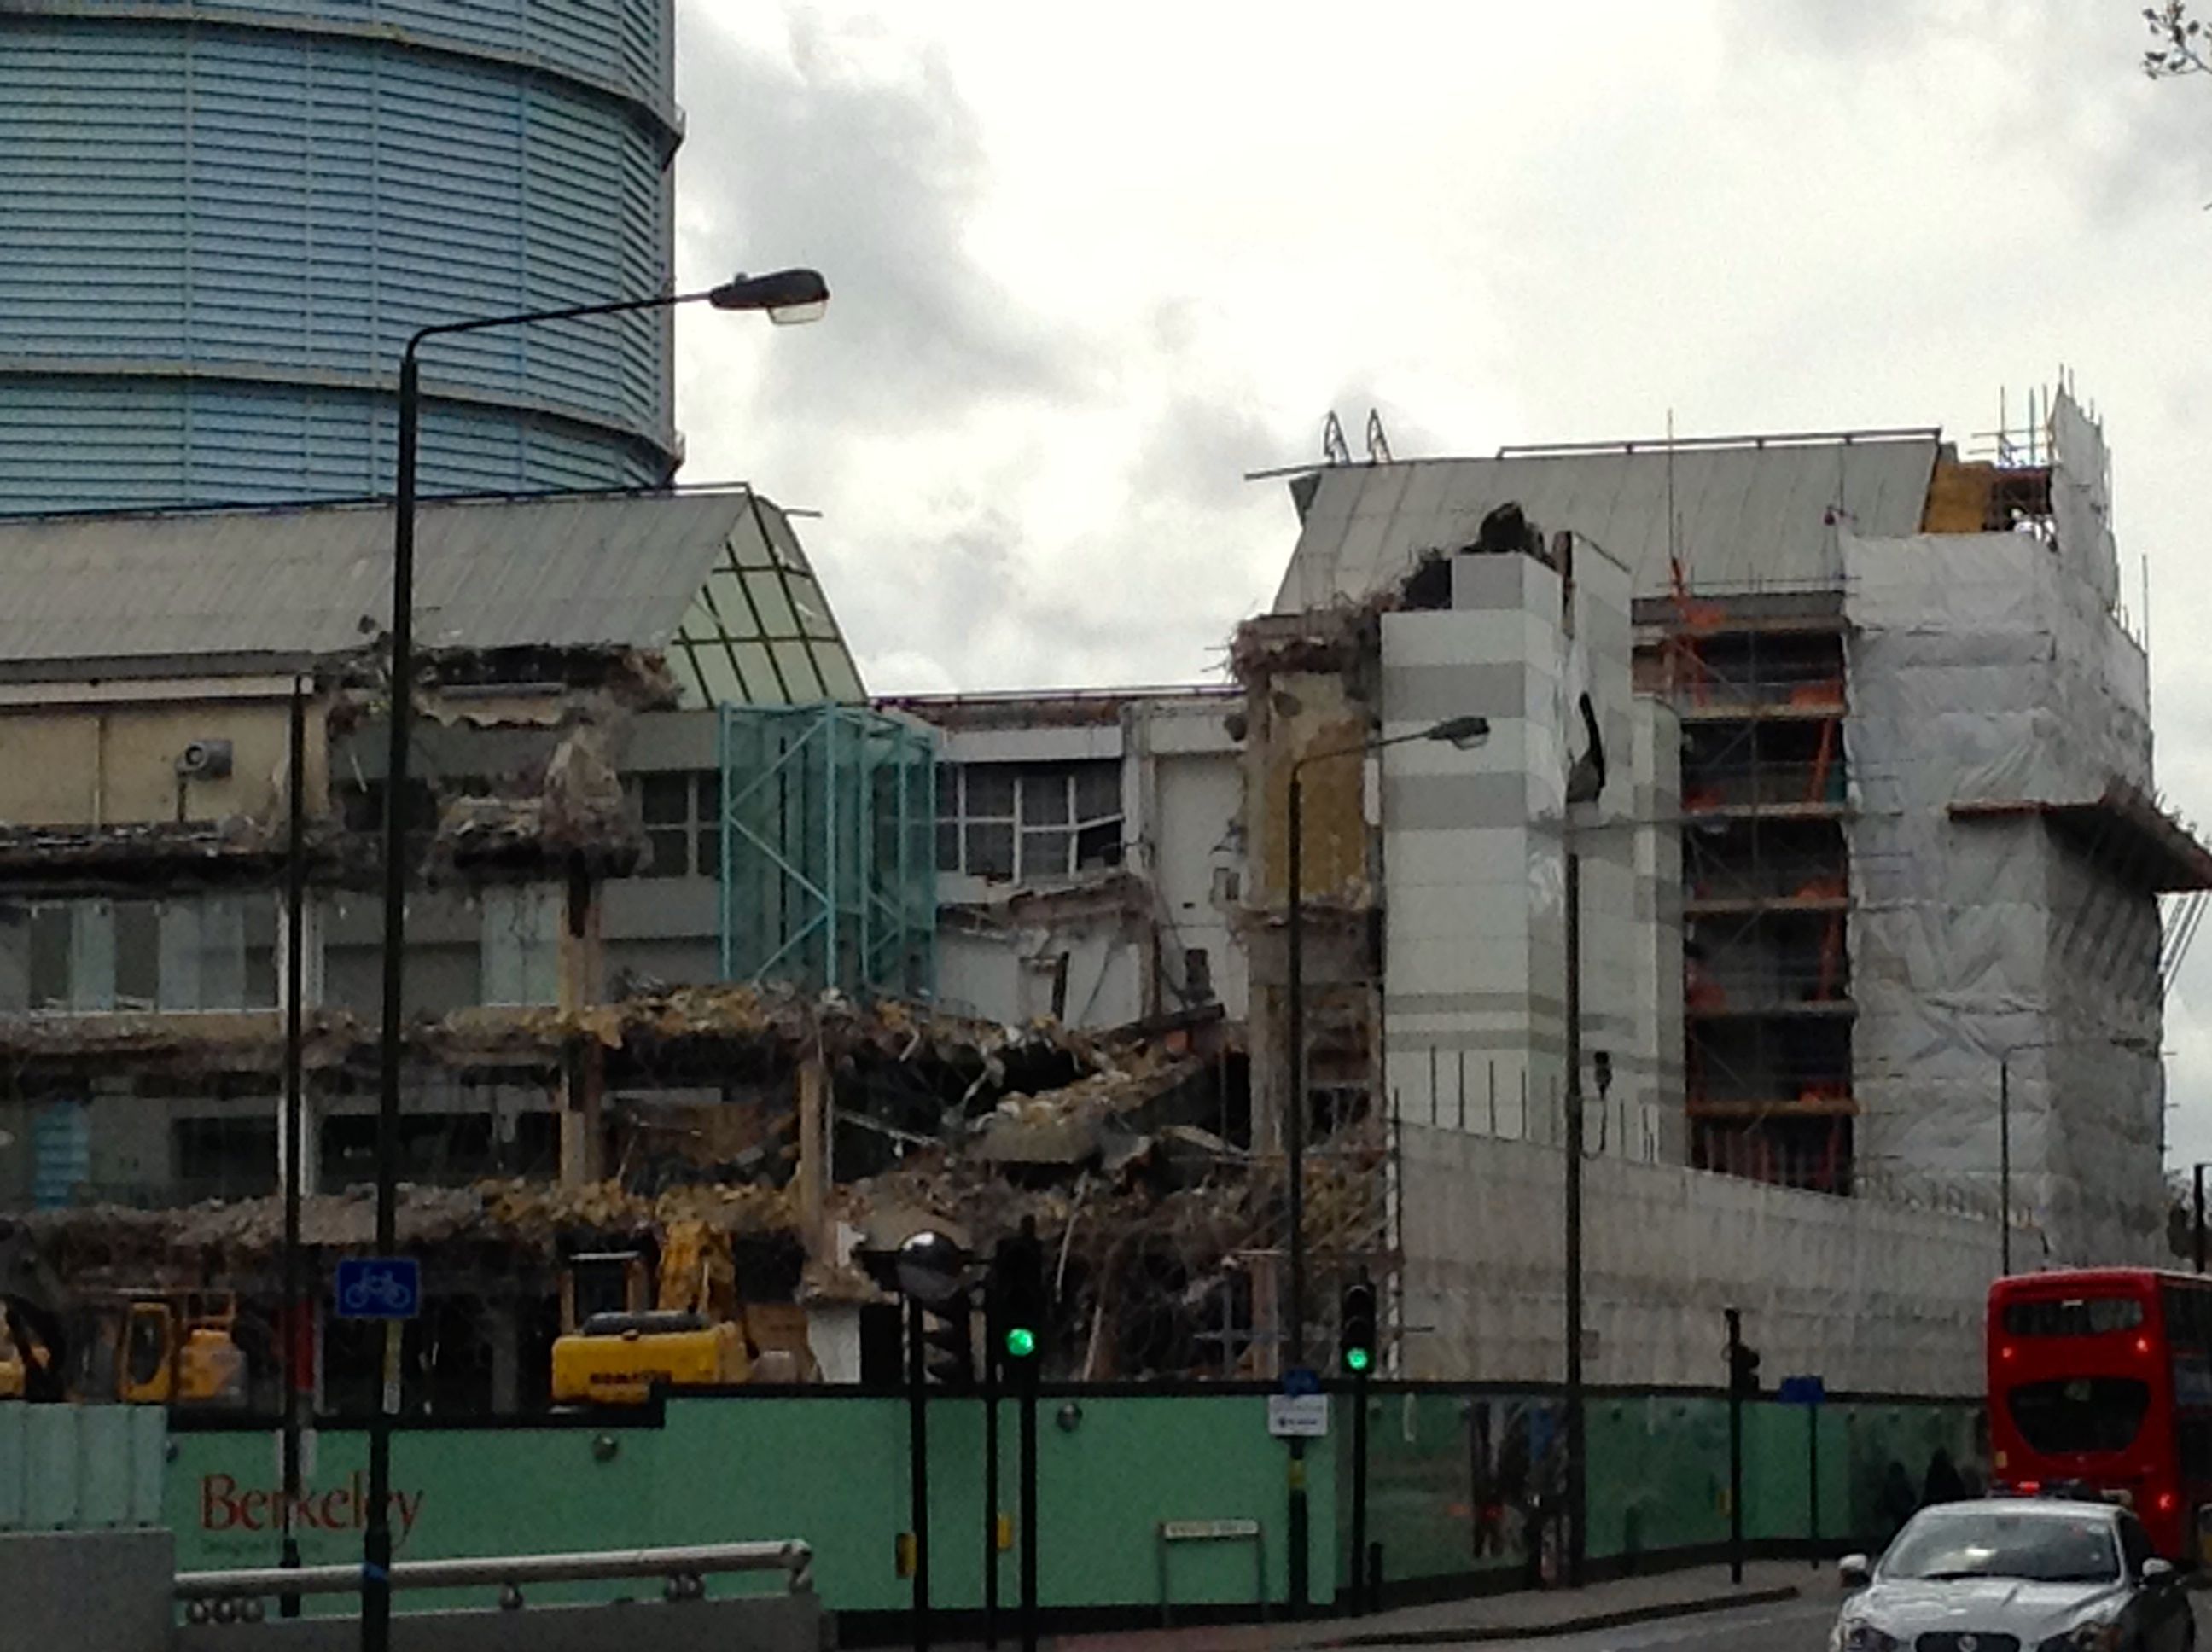 Marco Polo House being demolished